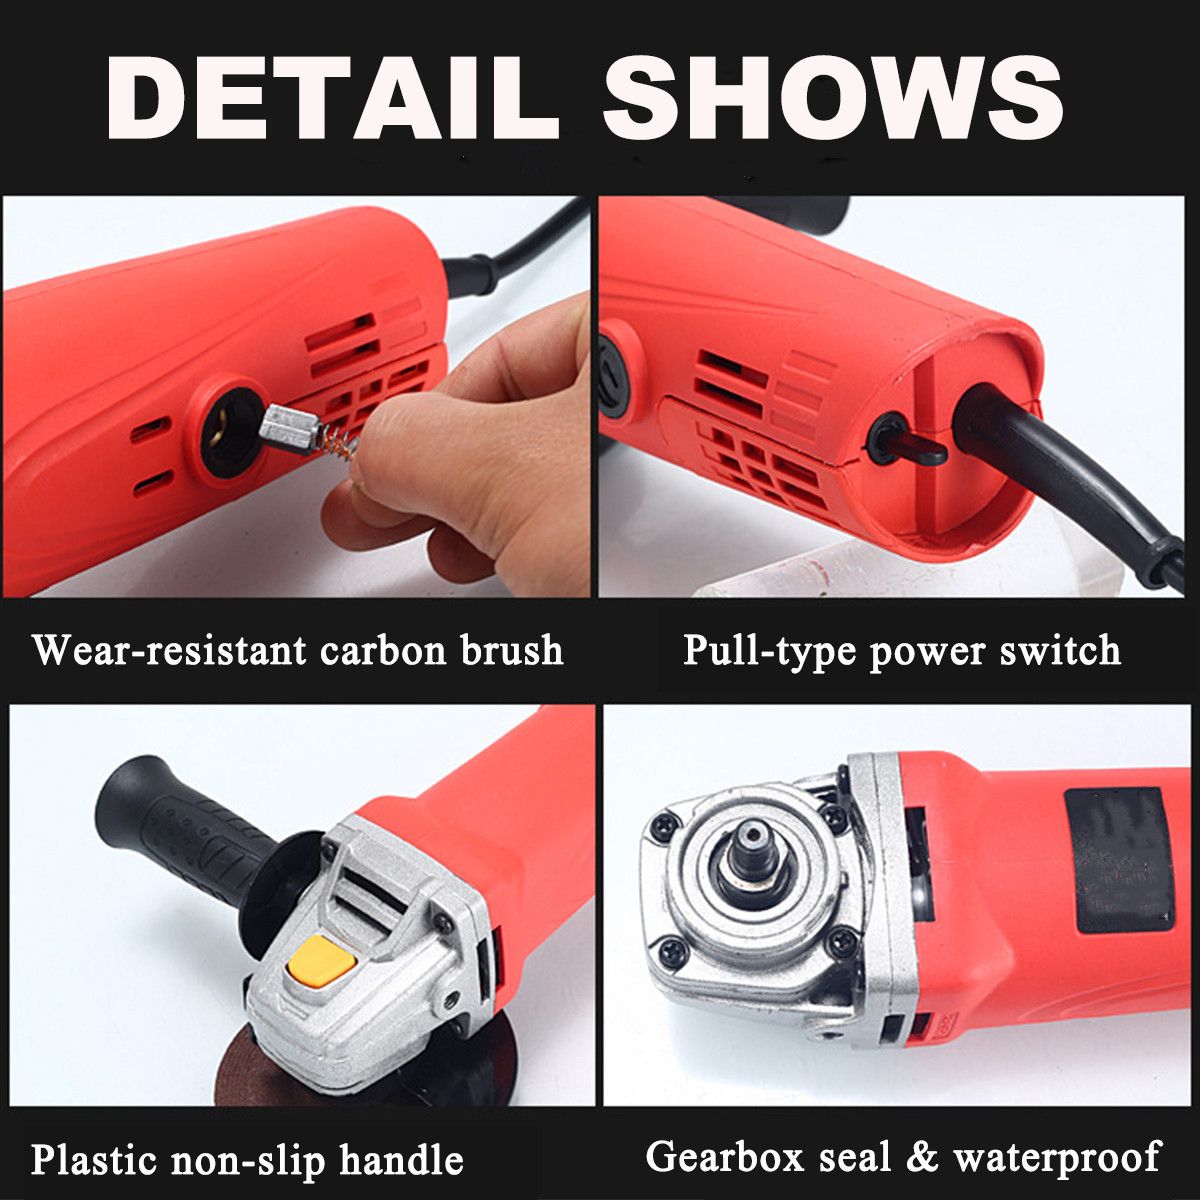 220V-Multifunctional-Power-Angle-Grinder-100mm-Grinding-Cutting-Polishing-Machine-Tool-Electric-Angl-1616157